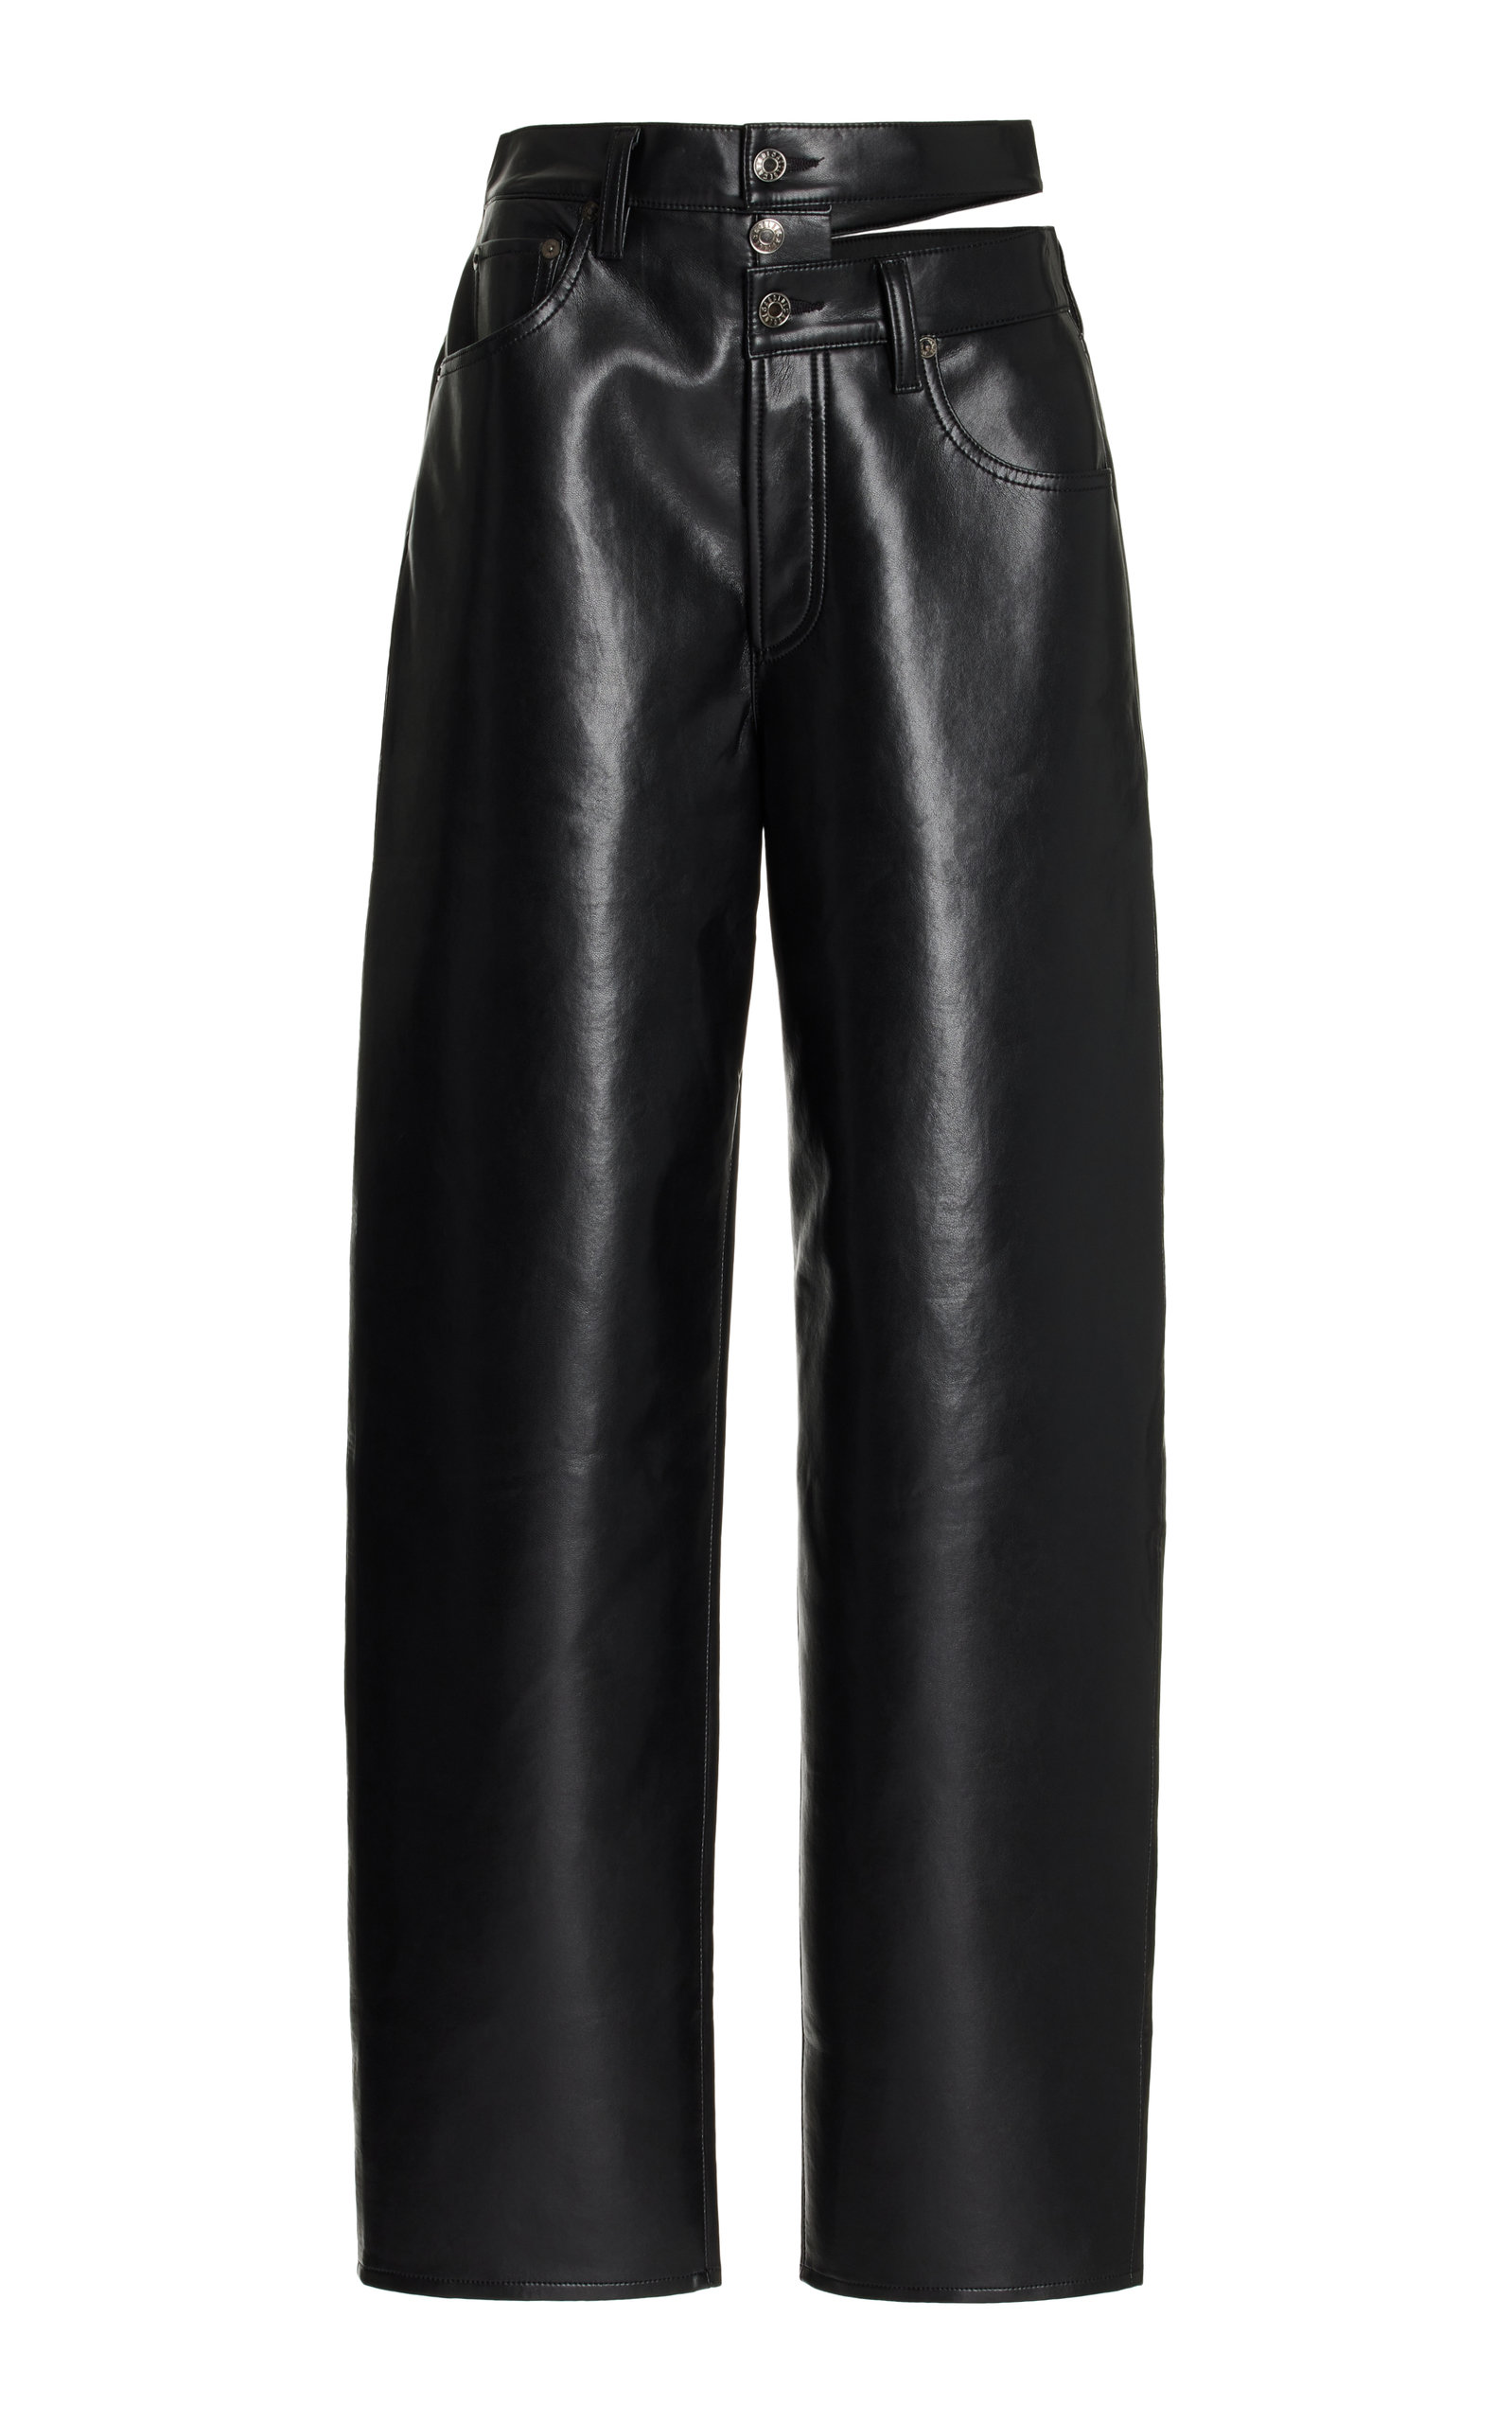 Agolde Women's Broken Waistband Recycled Leather Pants